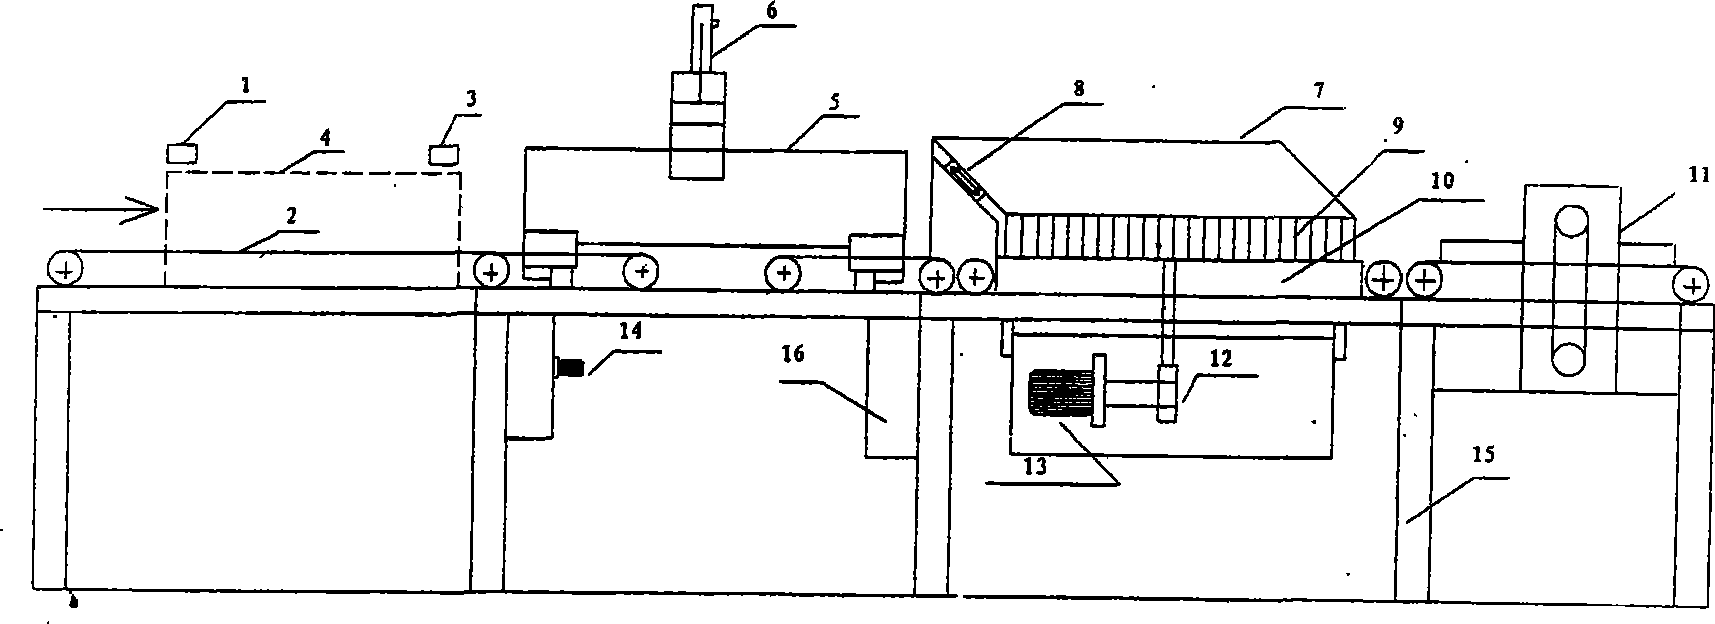 Brick-making dynamoelectric integrated blank-cutting method and active cut-in type blank-cutting machine